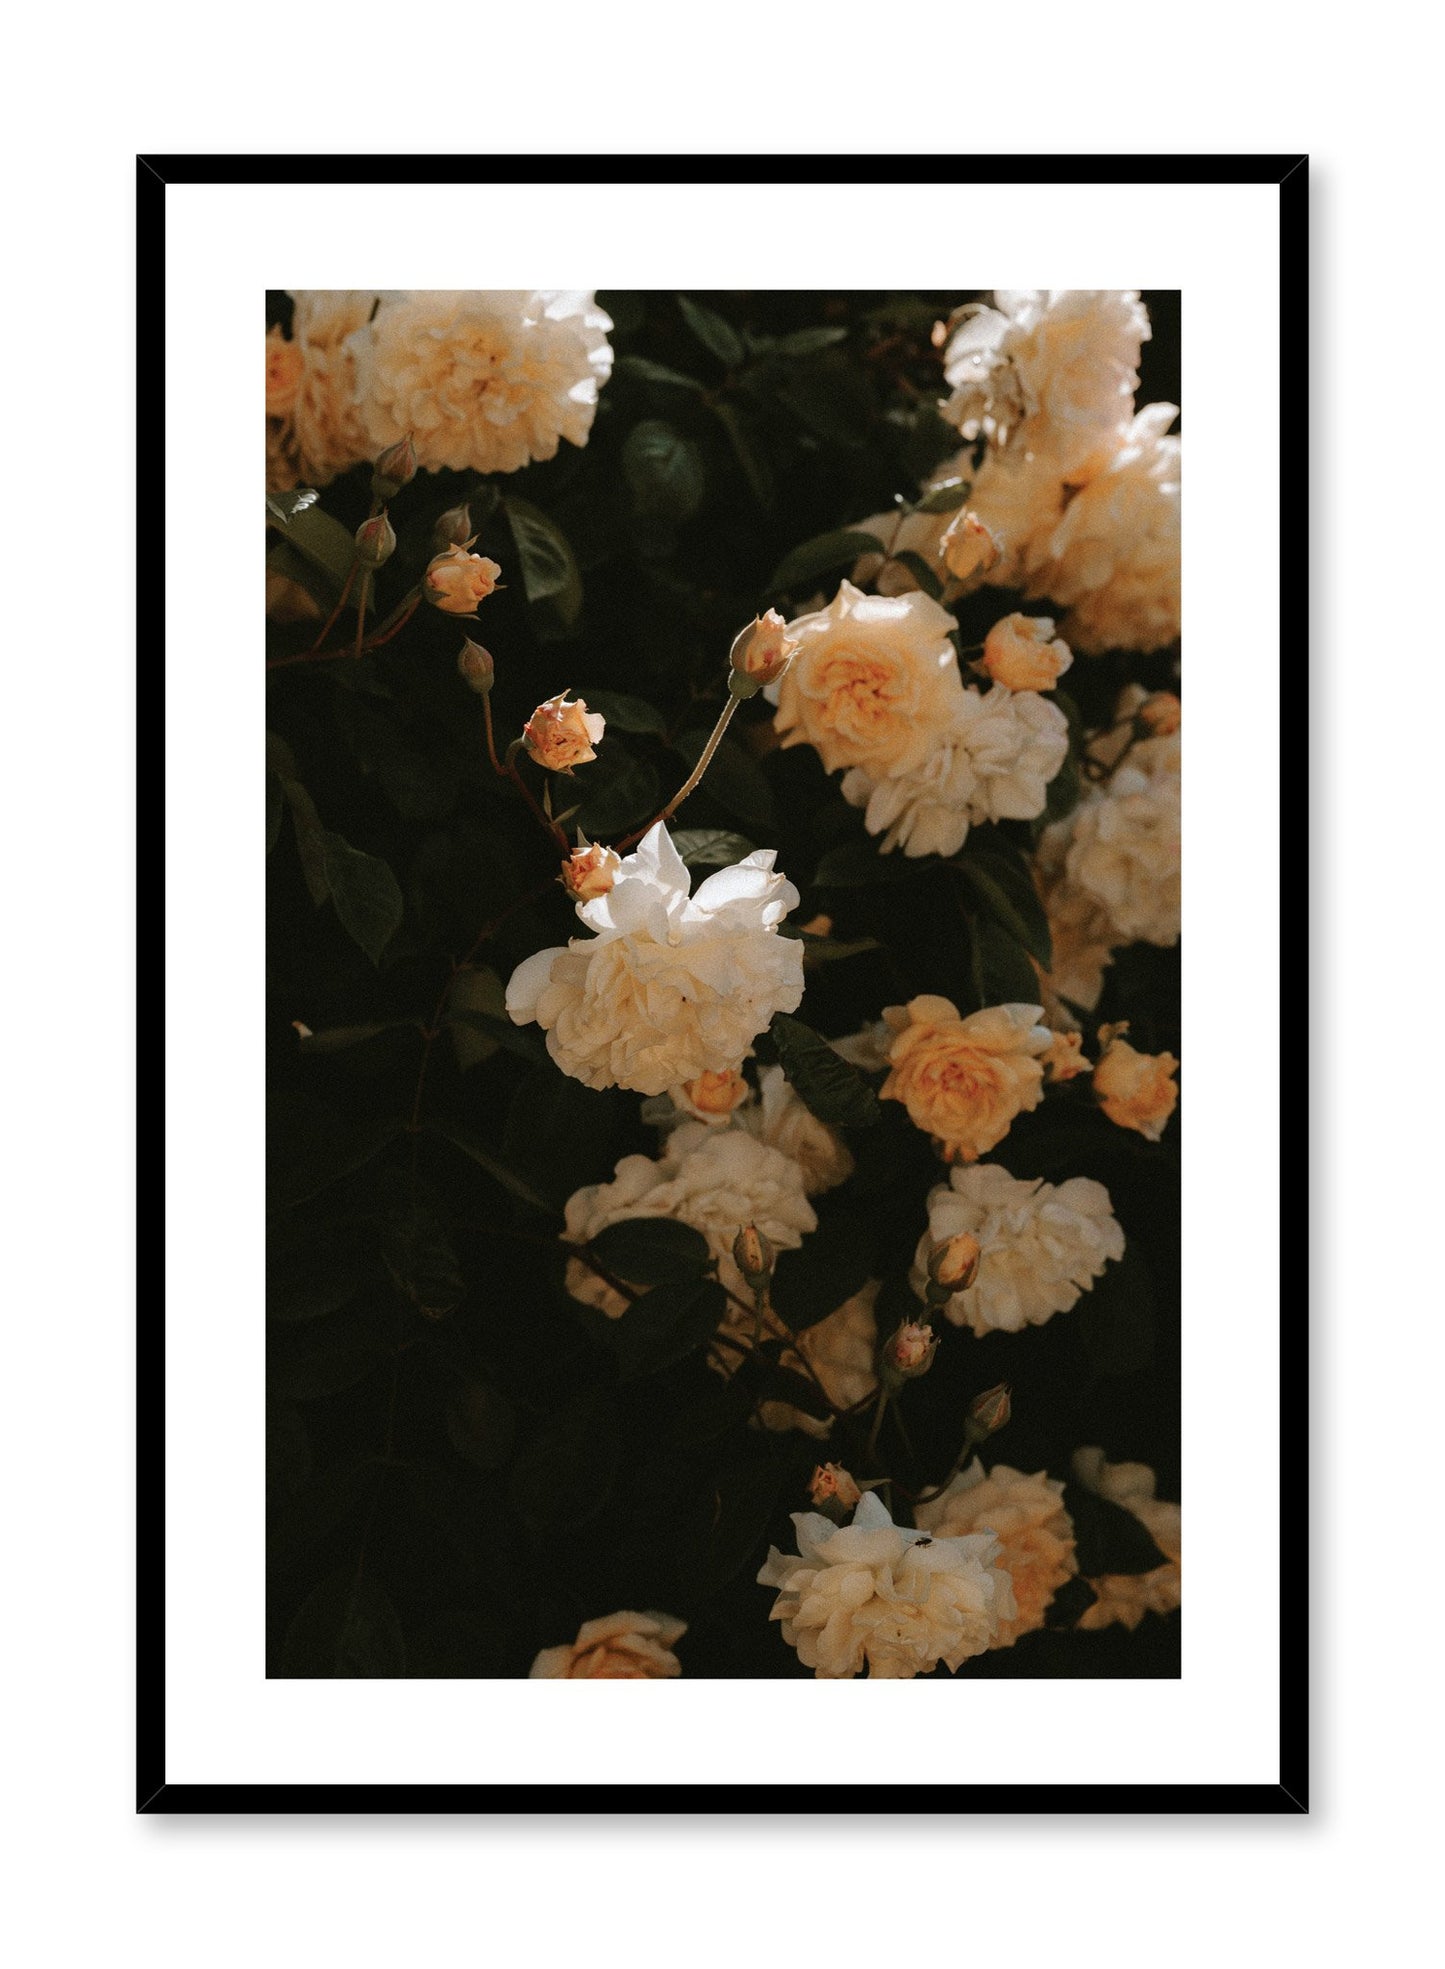 "Sun-Kissed Flowers" is a flower photography poster by Opposite Wall of sunlit peach coloured peonies. 